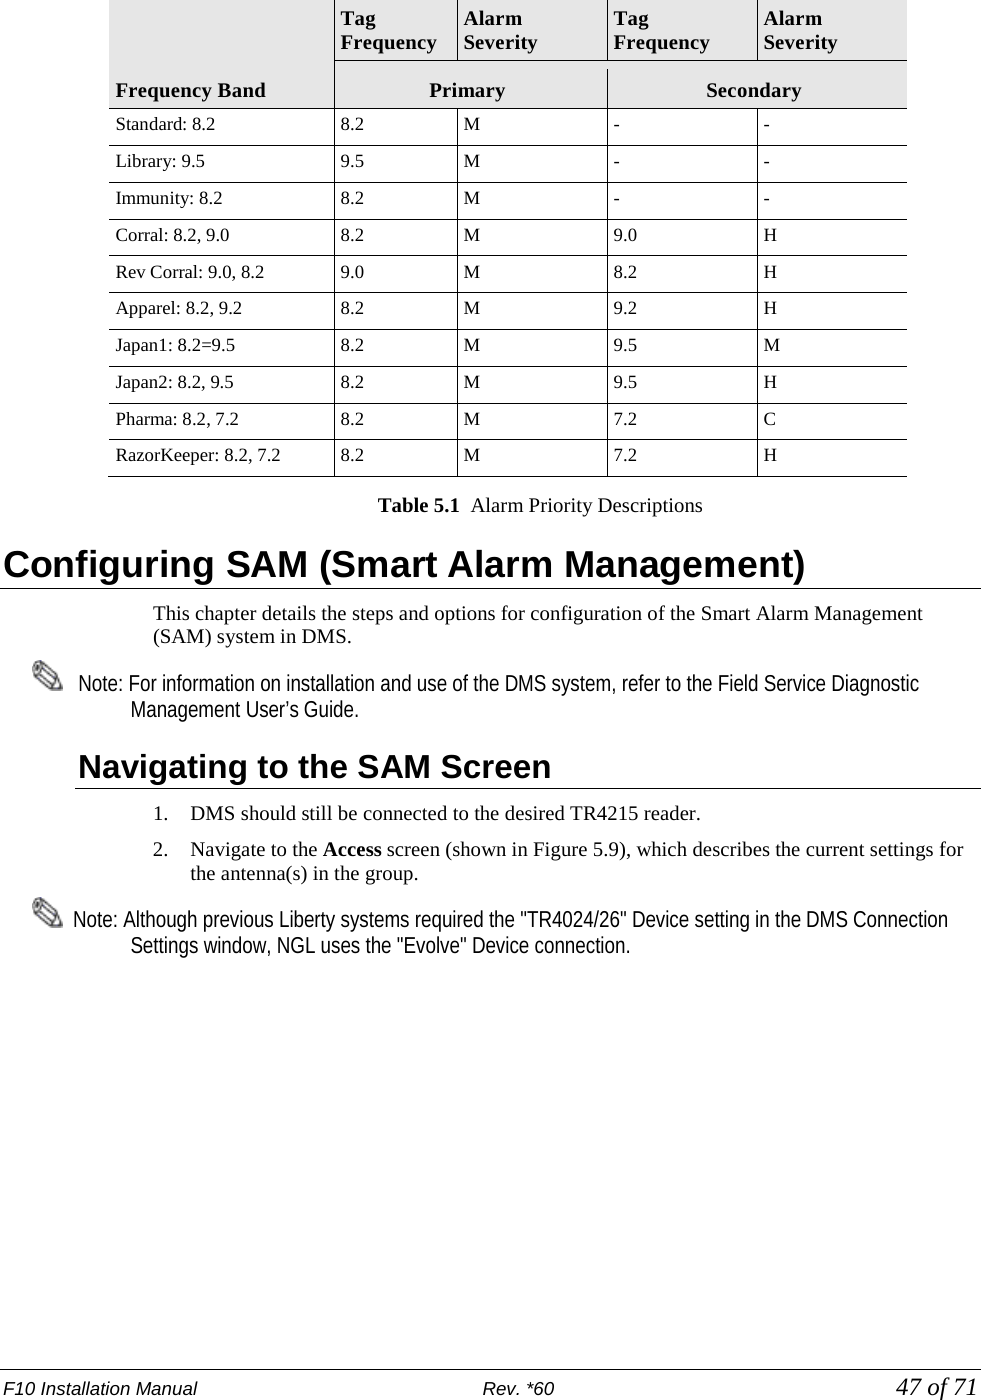 F10 Installation Manual                          Rev. *60            47 of 71     Table 5.1  Alarm Priority Descriptions Configuring SAM (Smart Alarm Management) This chapter details the steps and options for configuration of the Smart Alarm Management (SAM) system in DMS.     Note: For information on installation and use of the DMS system, refer to the Field Service Diagnostic Management User’s Guide.  Navigating to the SAM Screen  1. DMS should still be connected to the desired TR4215 reader.  2. Navigate to the Access screen (shown in Figure 5.9), which describes the current settings for the antenna(s) in the group.   Note: Although previous Liberty systems required the &quot;TR4024/26&quot; Device setting in the DMS Connection Settings window, NGL uses the &quot;Evolve&quot; Device connection.    Frequency Band Tag Frequency Alarm Severity Tag Frequency Alarm Severity Primary Secondary Standard: 8.2 8.2 M - - Library: 9.5 9.5 M - - Immunity: 8.2 8.2 M - - Corral: 8.2, 9.0 8.2 M 9.0 H Rev Corral: 9.0, 8.2 9.0 M 8.2 H Apparel: 8.2, 9.2 8.2 M 9.2 H Japan1: 8.2=9.5 8.2 M 9.5 M Japan2: 8.2, 9.5 8.2 M 9.5 H Pharma: 8.2, 7.2 8.2 M 7.2 C RazorKeeper: 8.2, 7.2 8.2 M  7.2 H 